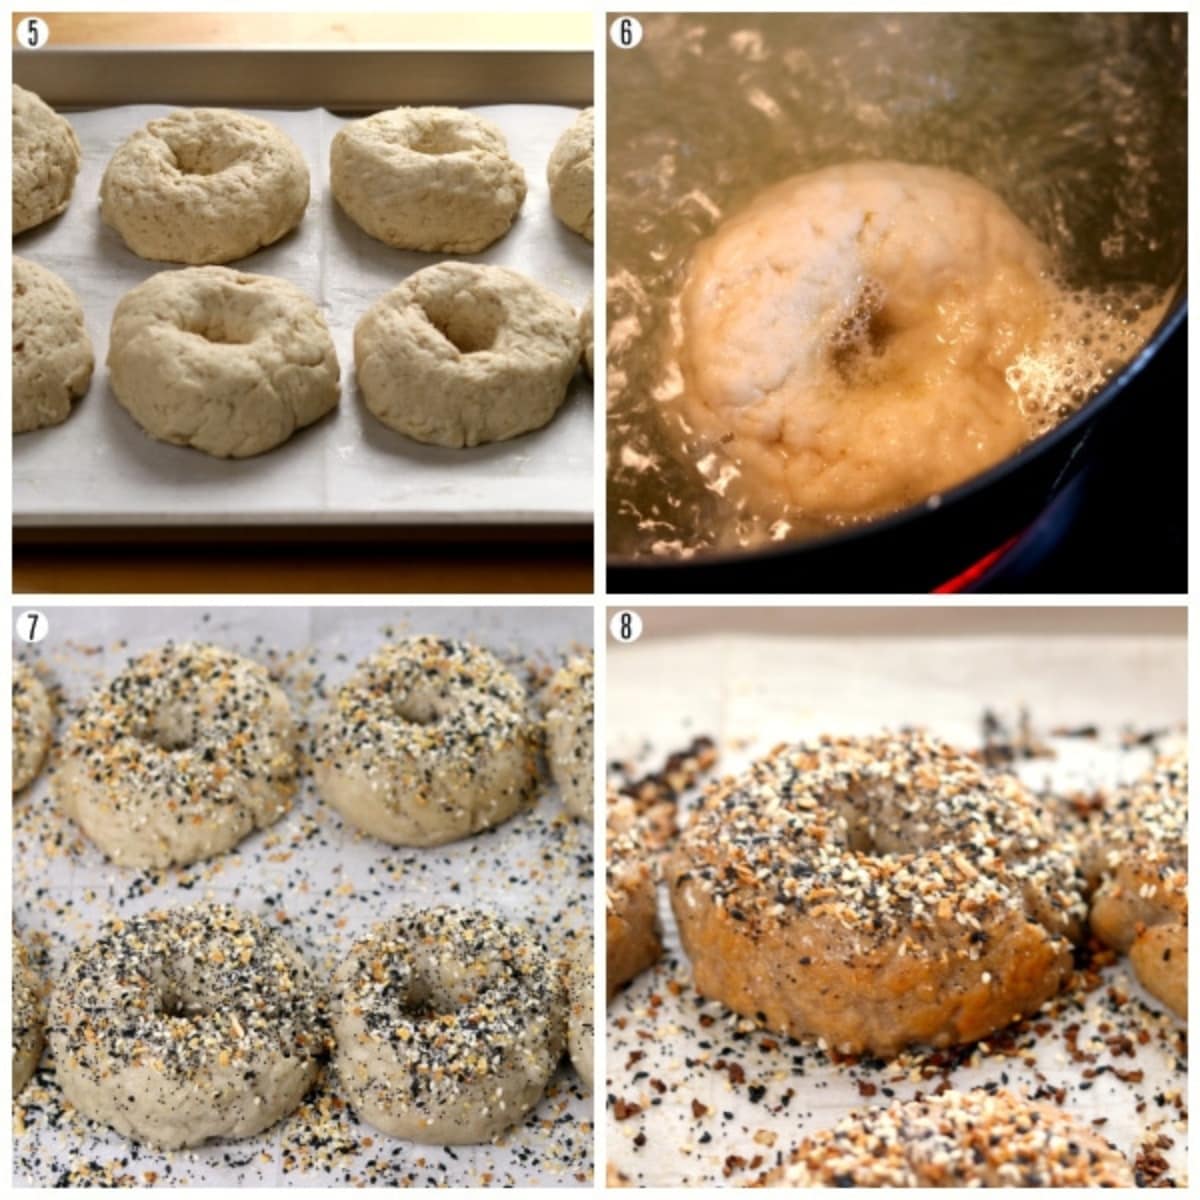 gluten-free bagels recipe steps 1-8 for baking the bagels